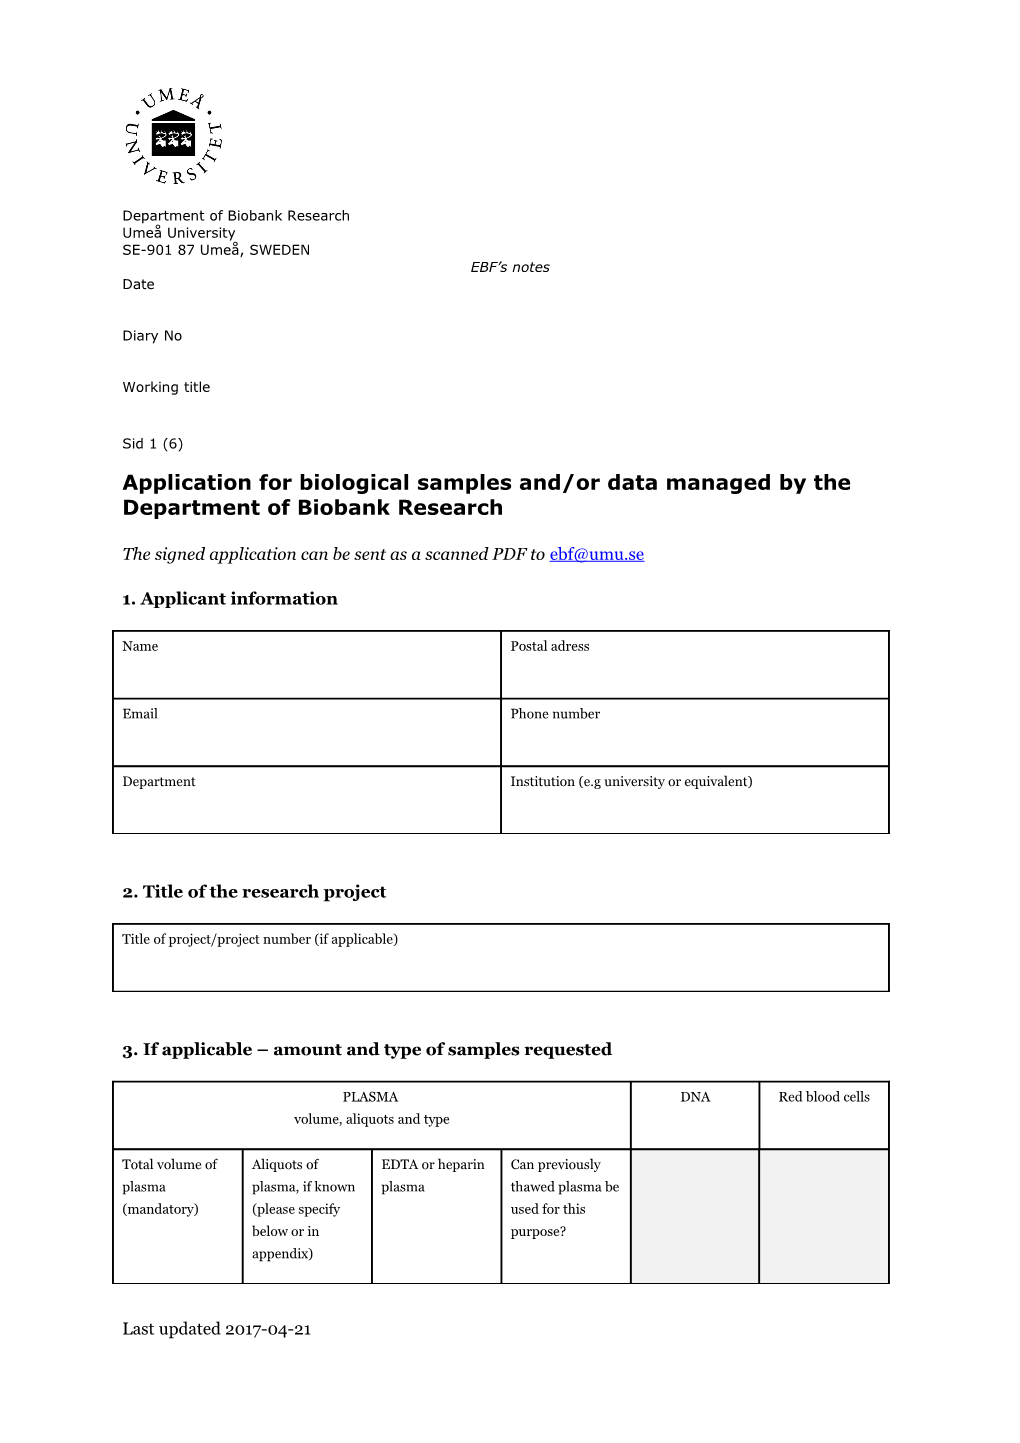 Application for Biological Samples And/Or Data Managed by the Department of Biobank Research